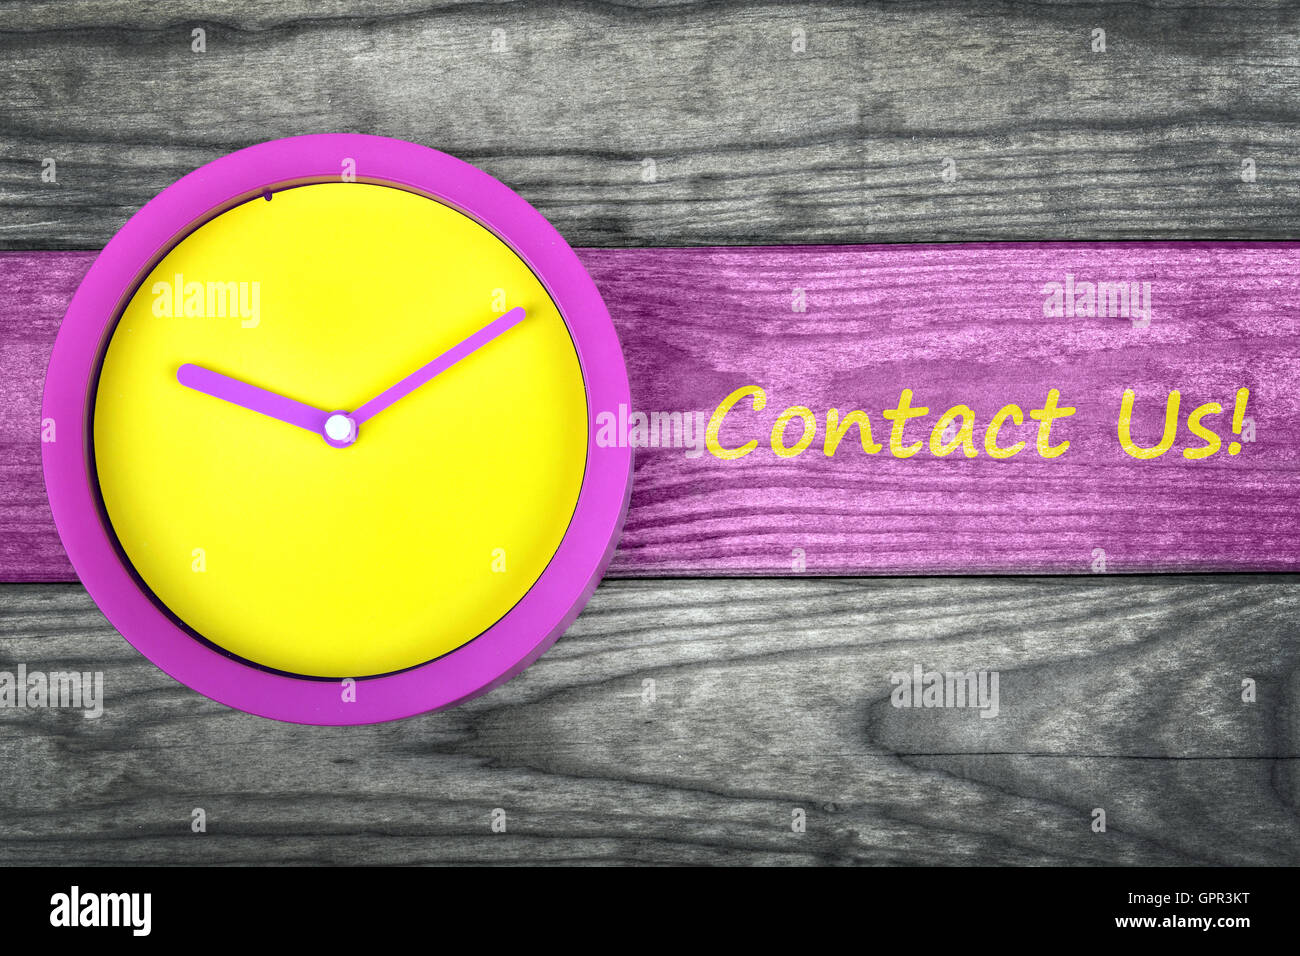 Contact Us message and clock on wooden table Stock Photo